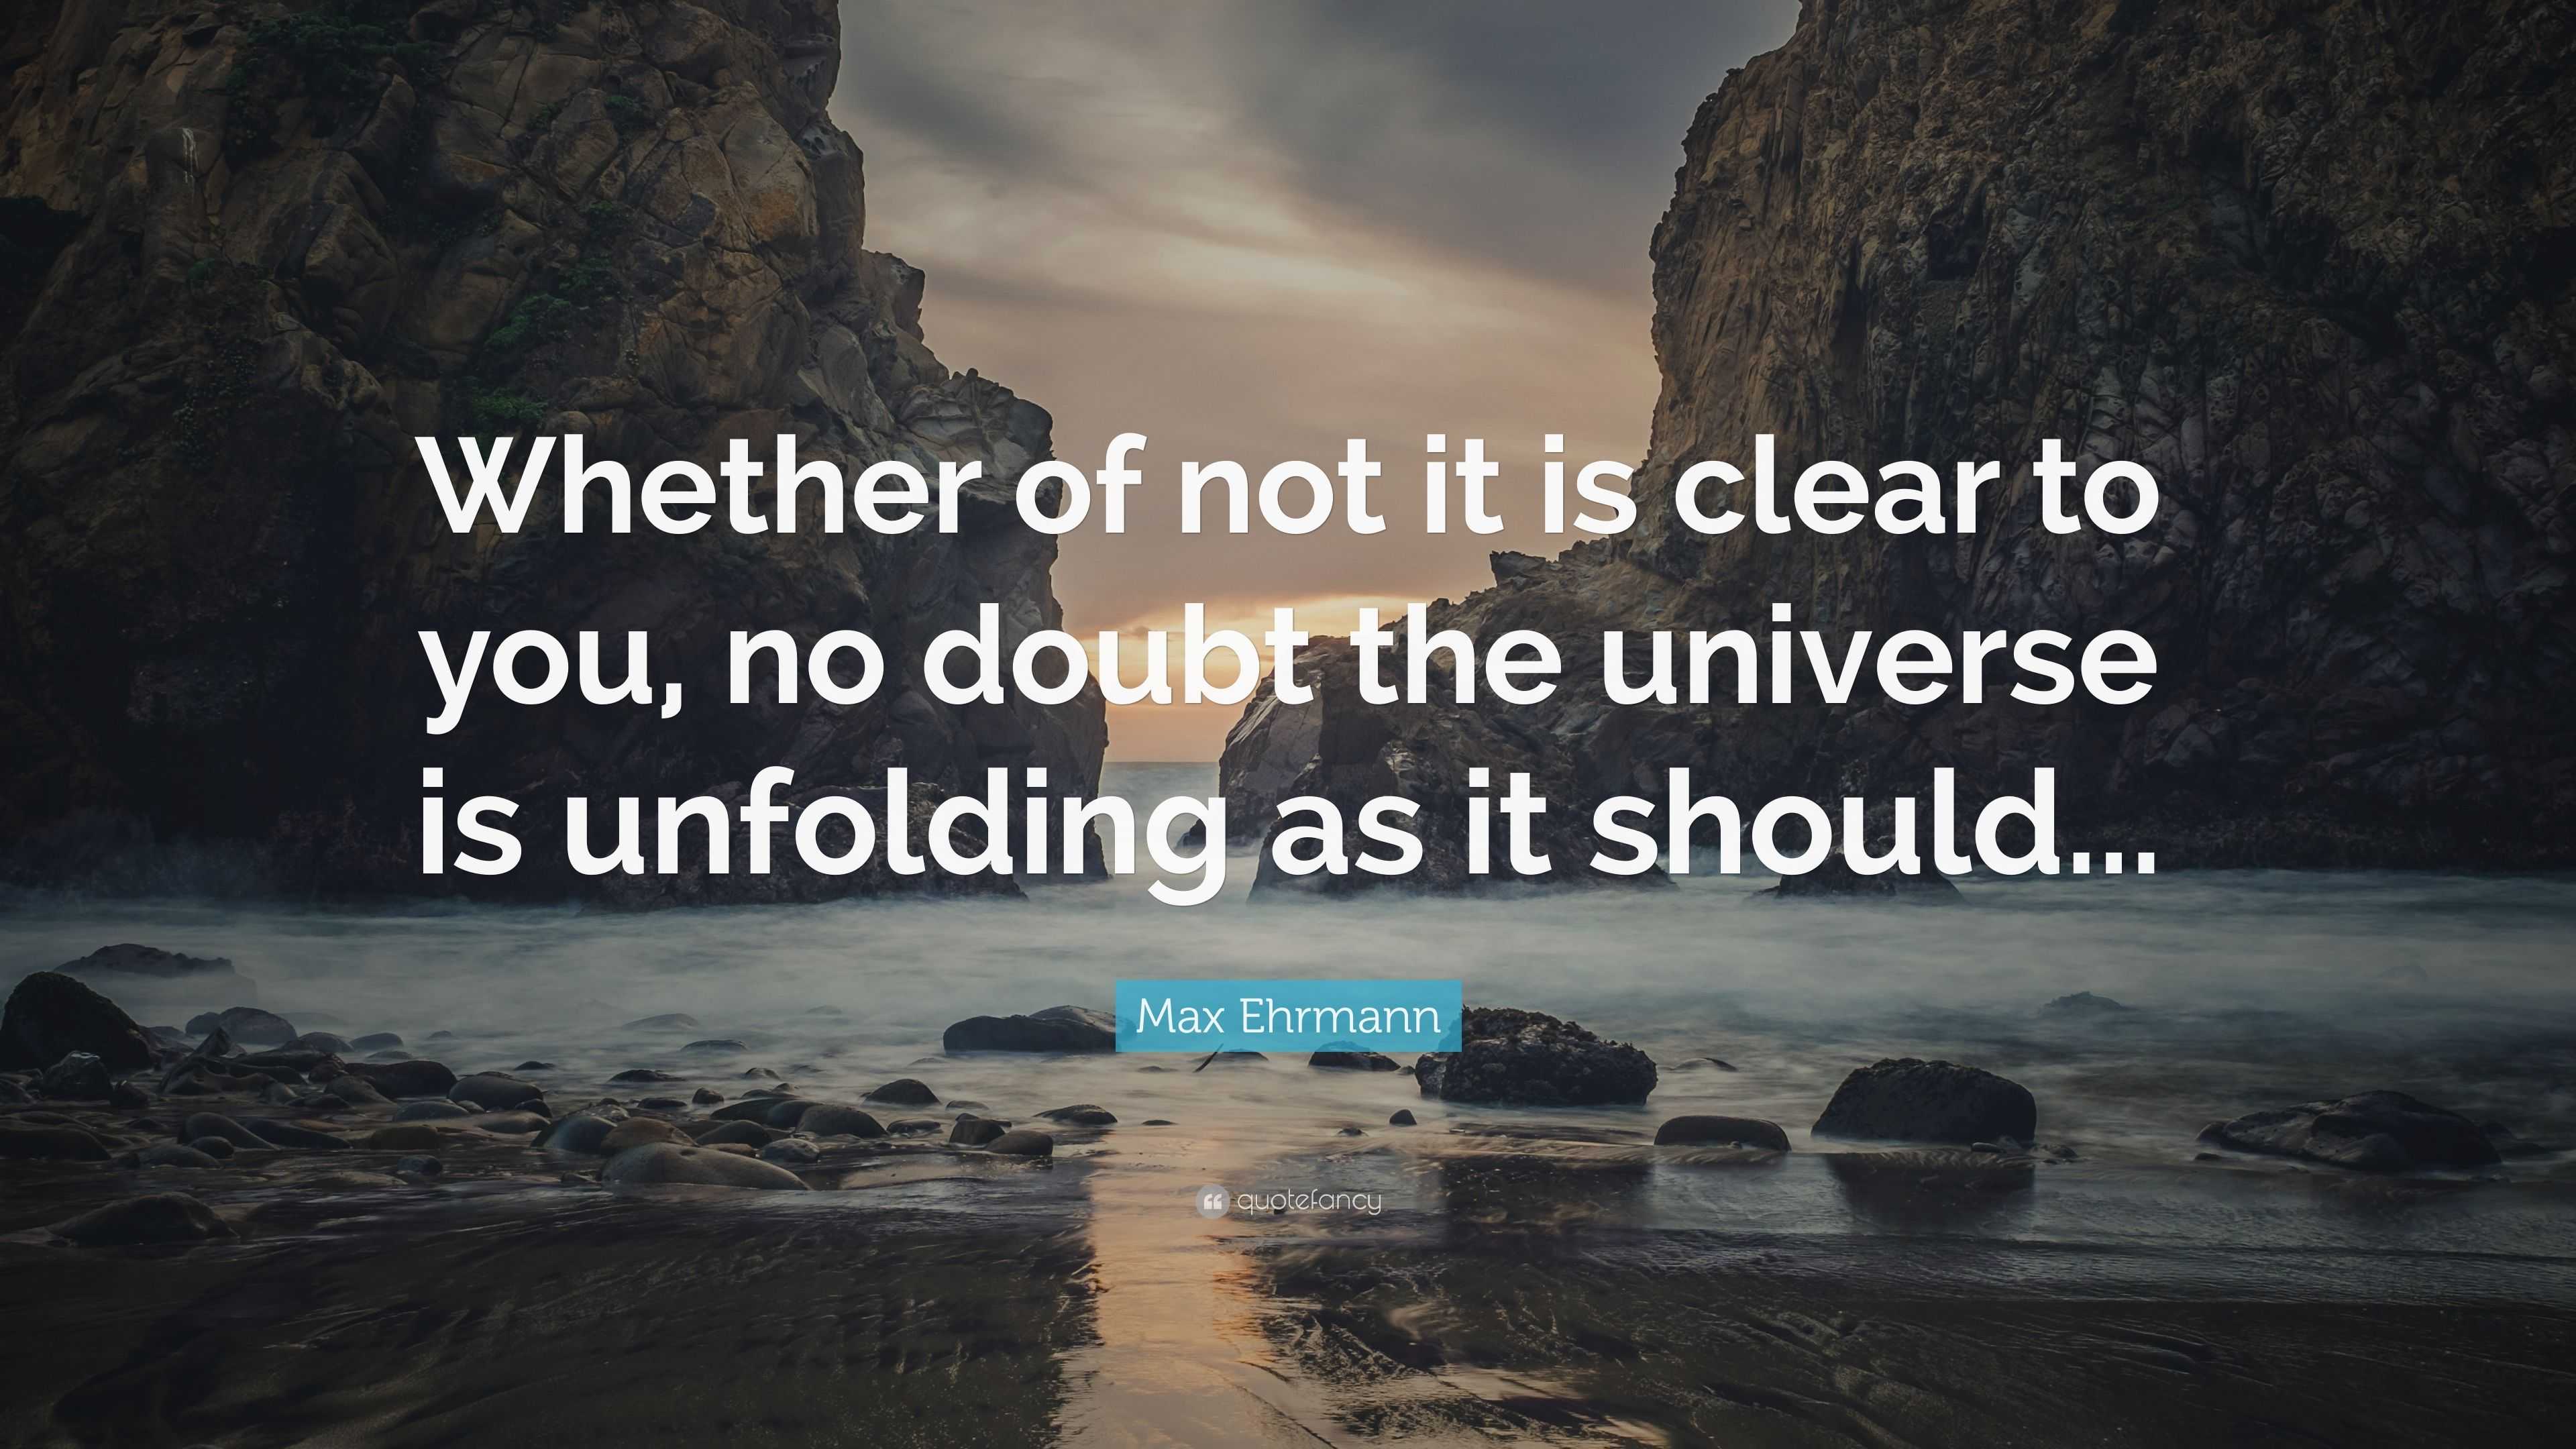 Max Ehrmann Quote: “Whether of not it is clear to you, no doubt the ...